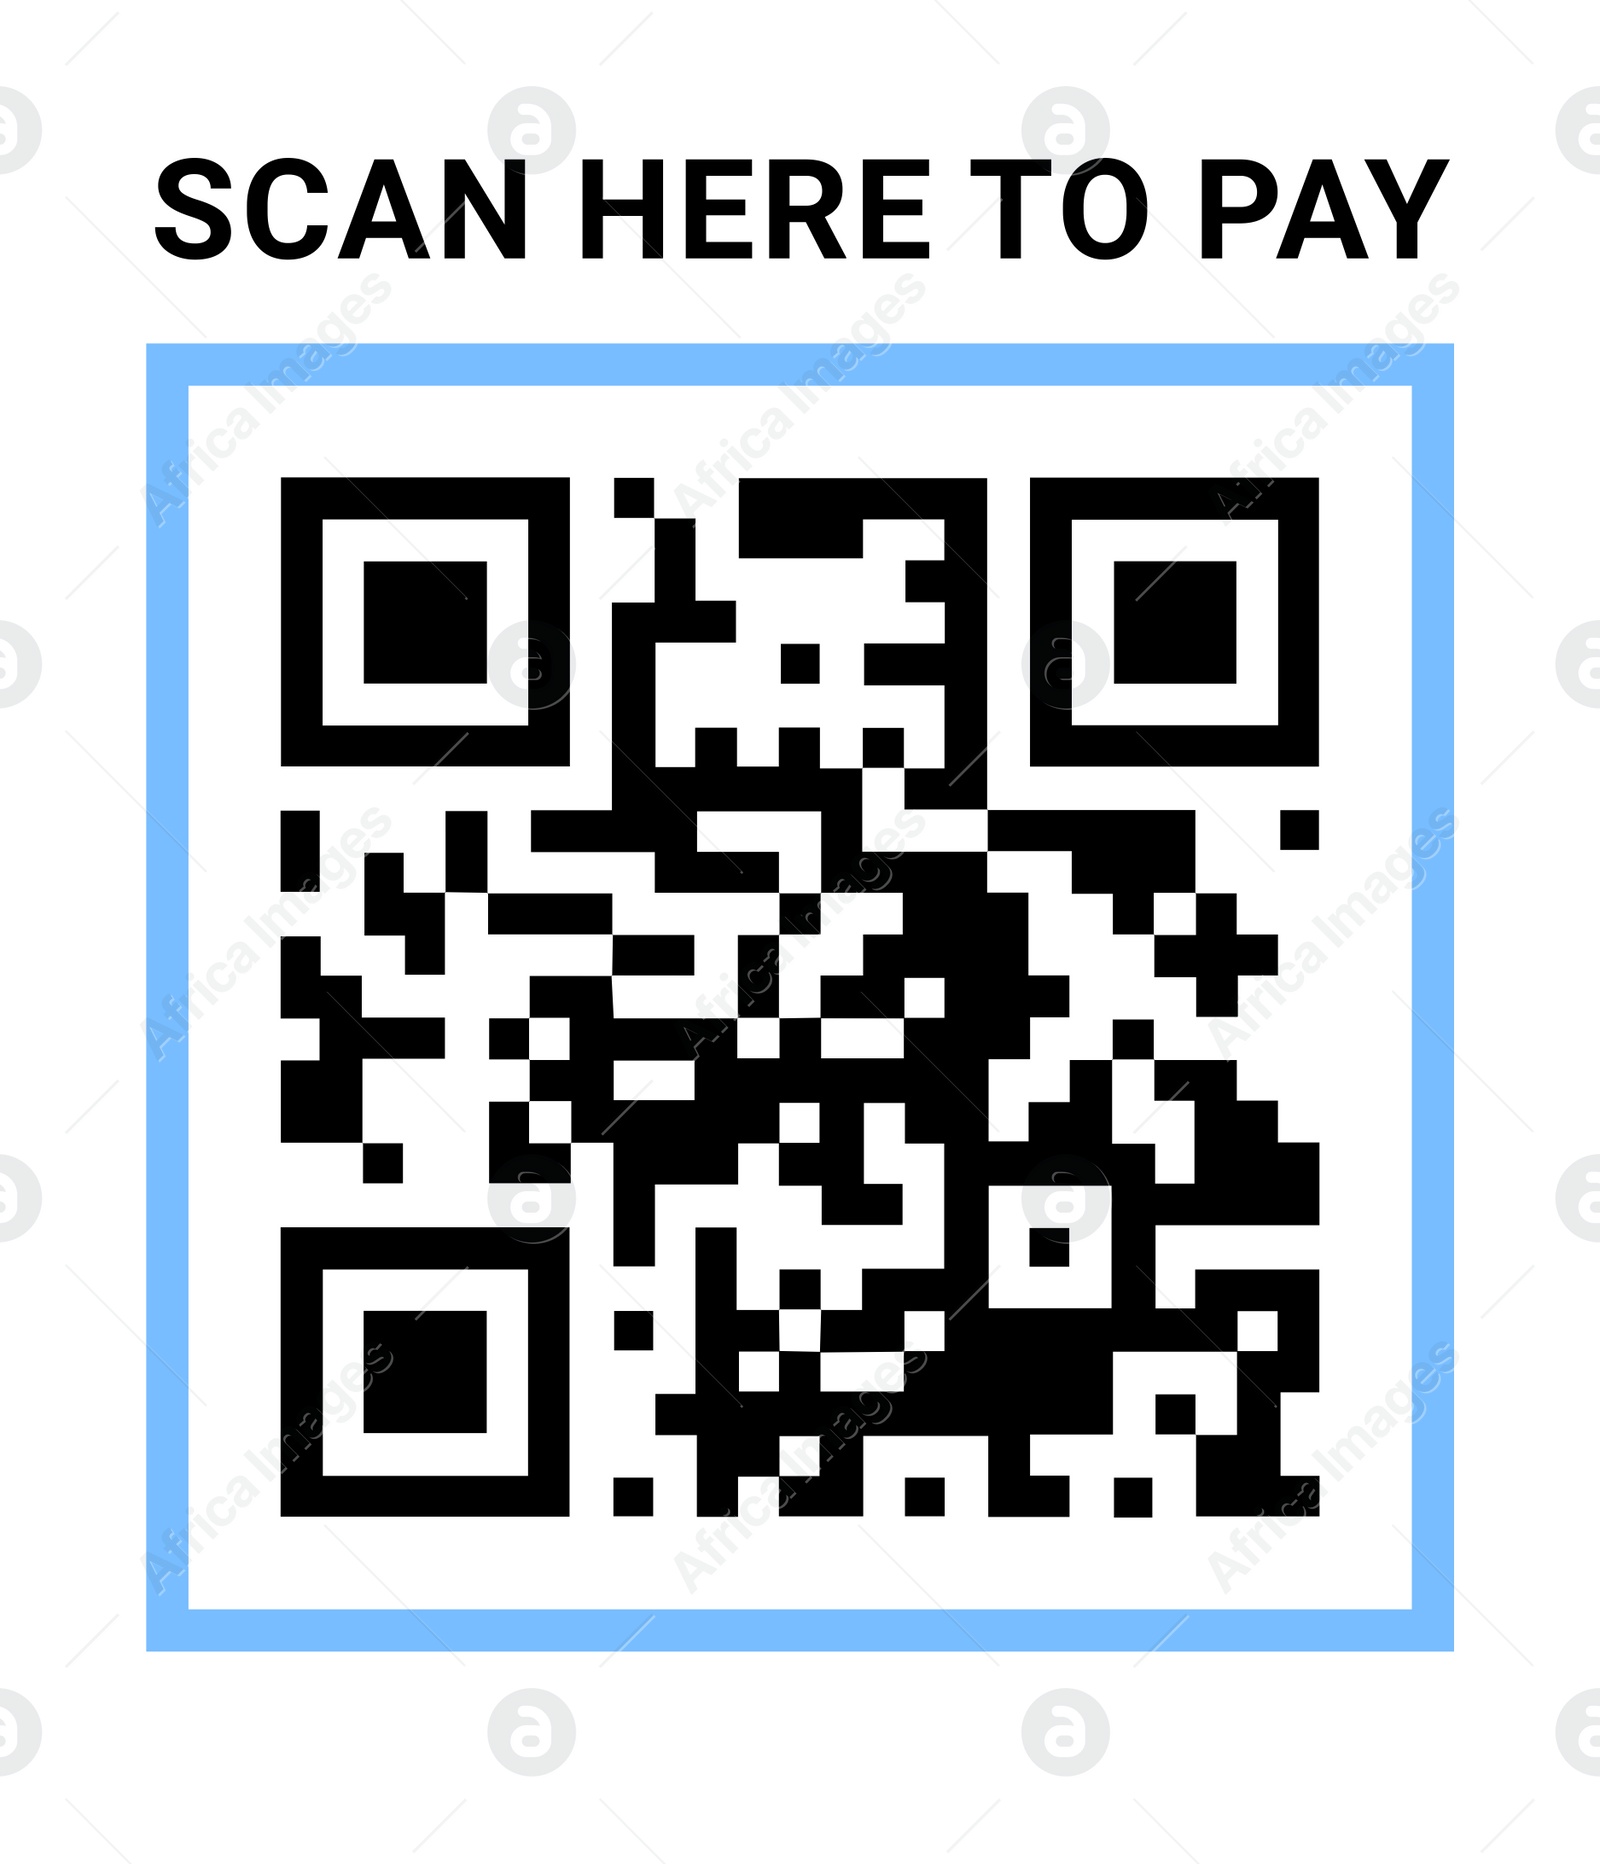 Illustration of Scan QR code for contactless payment, illustration